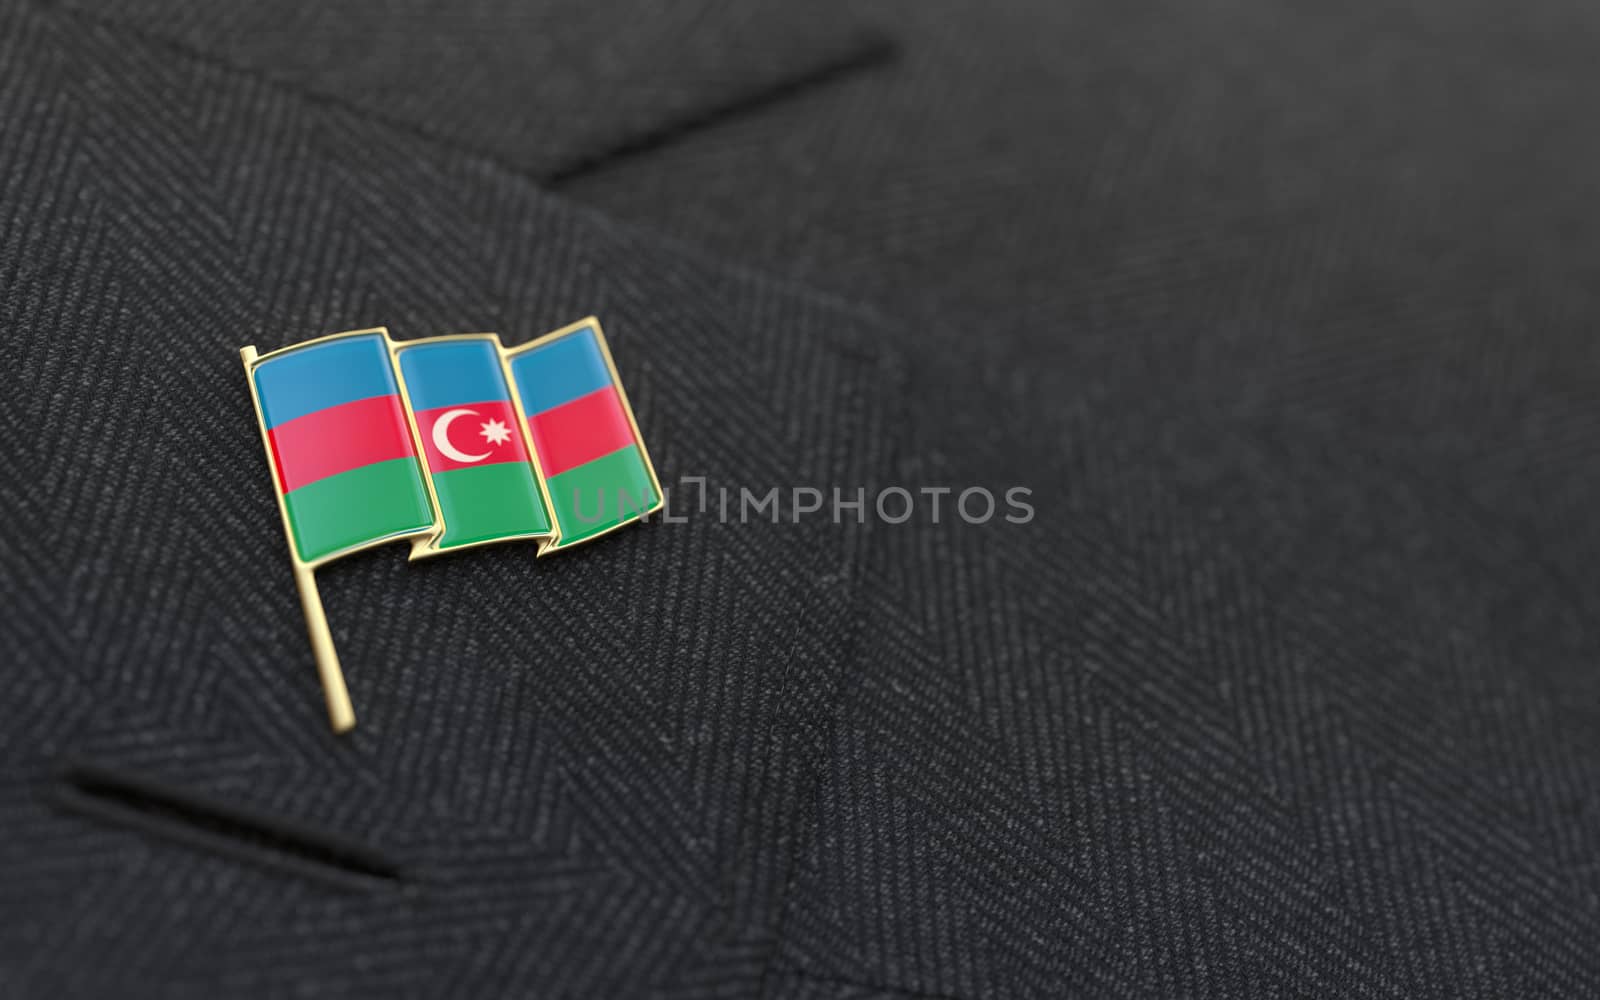 Azerbaijan flag lapel pin on the collar of a business suit jacket shows patriotism